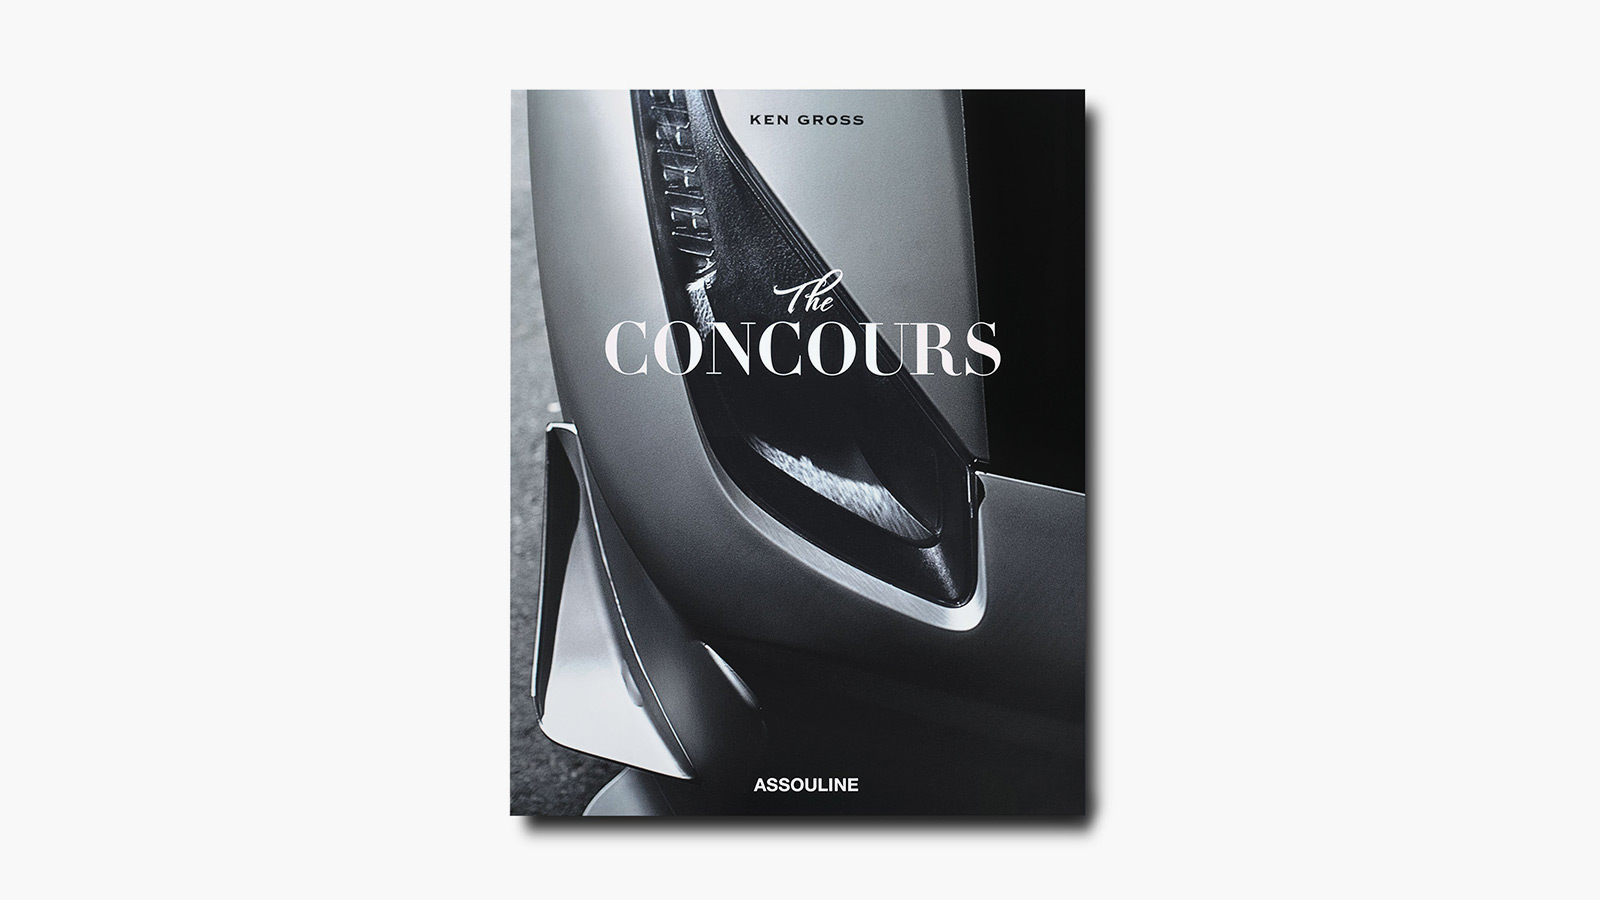 'The Concours' by Ken Gross